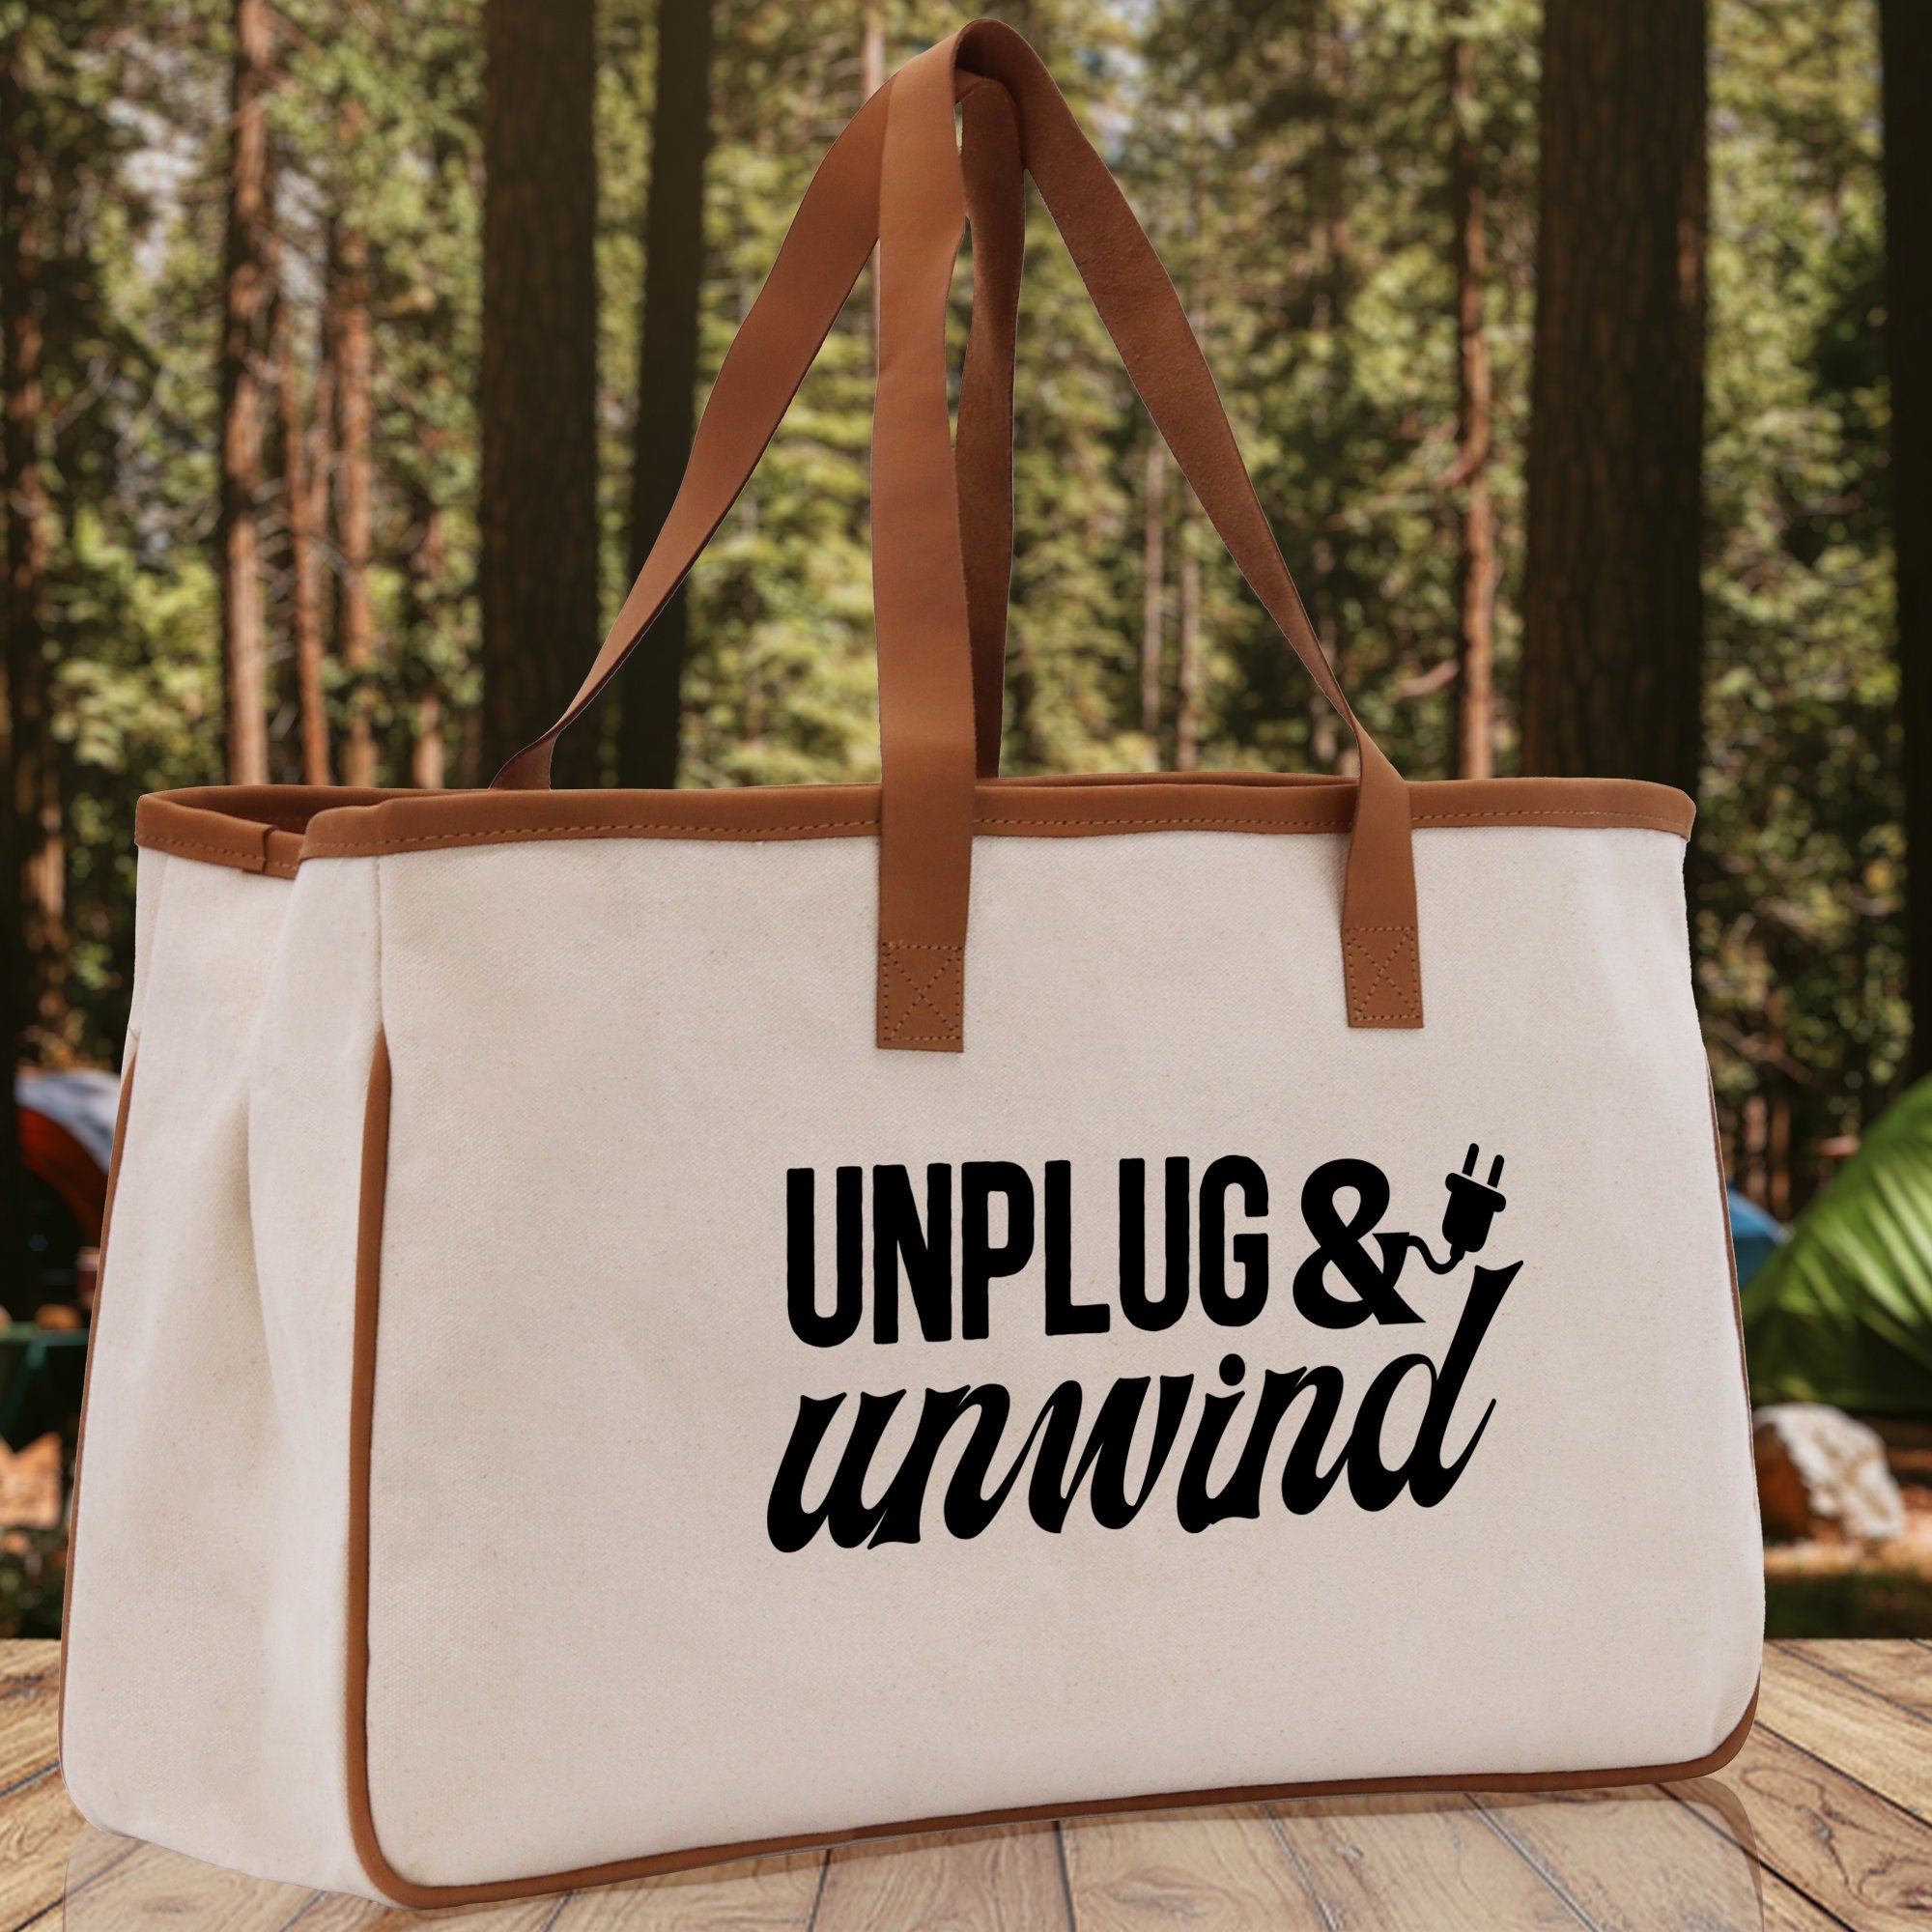 Unplug & Unwind Cotton Canvas Chic Tote Bag Camping Tote Camping Lover Gift Tote Bag Outdoor Tote Weekender Tote Multipurpose Camper Tote